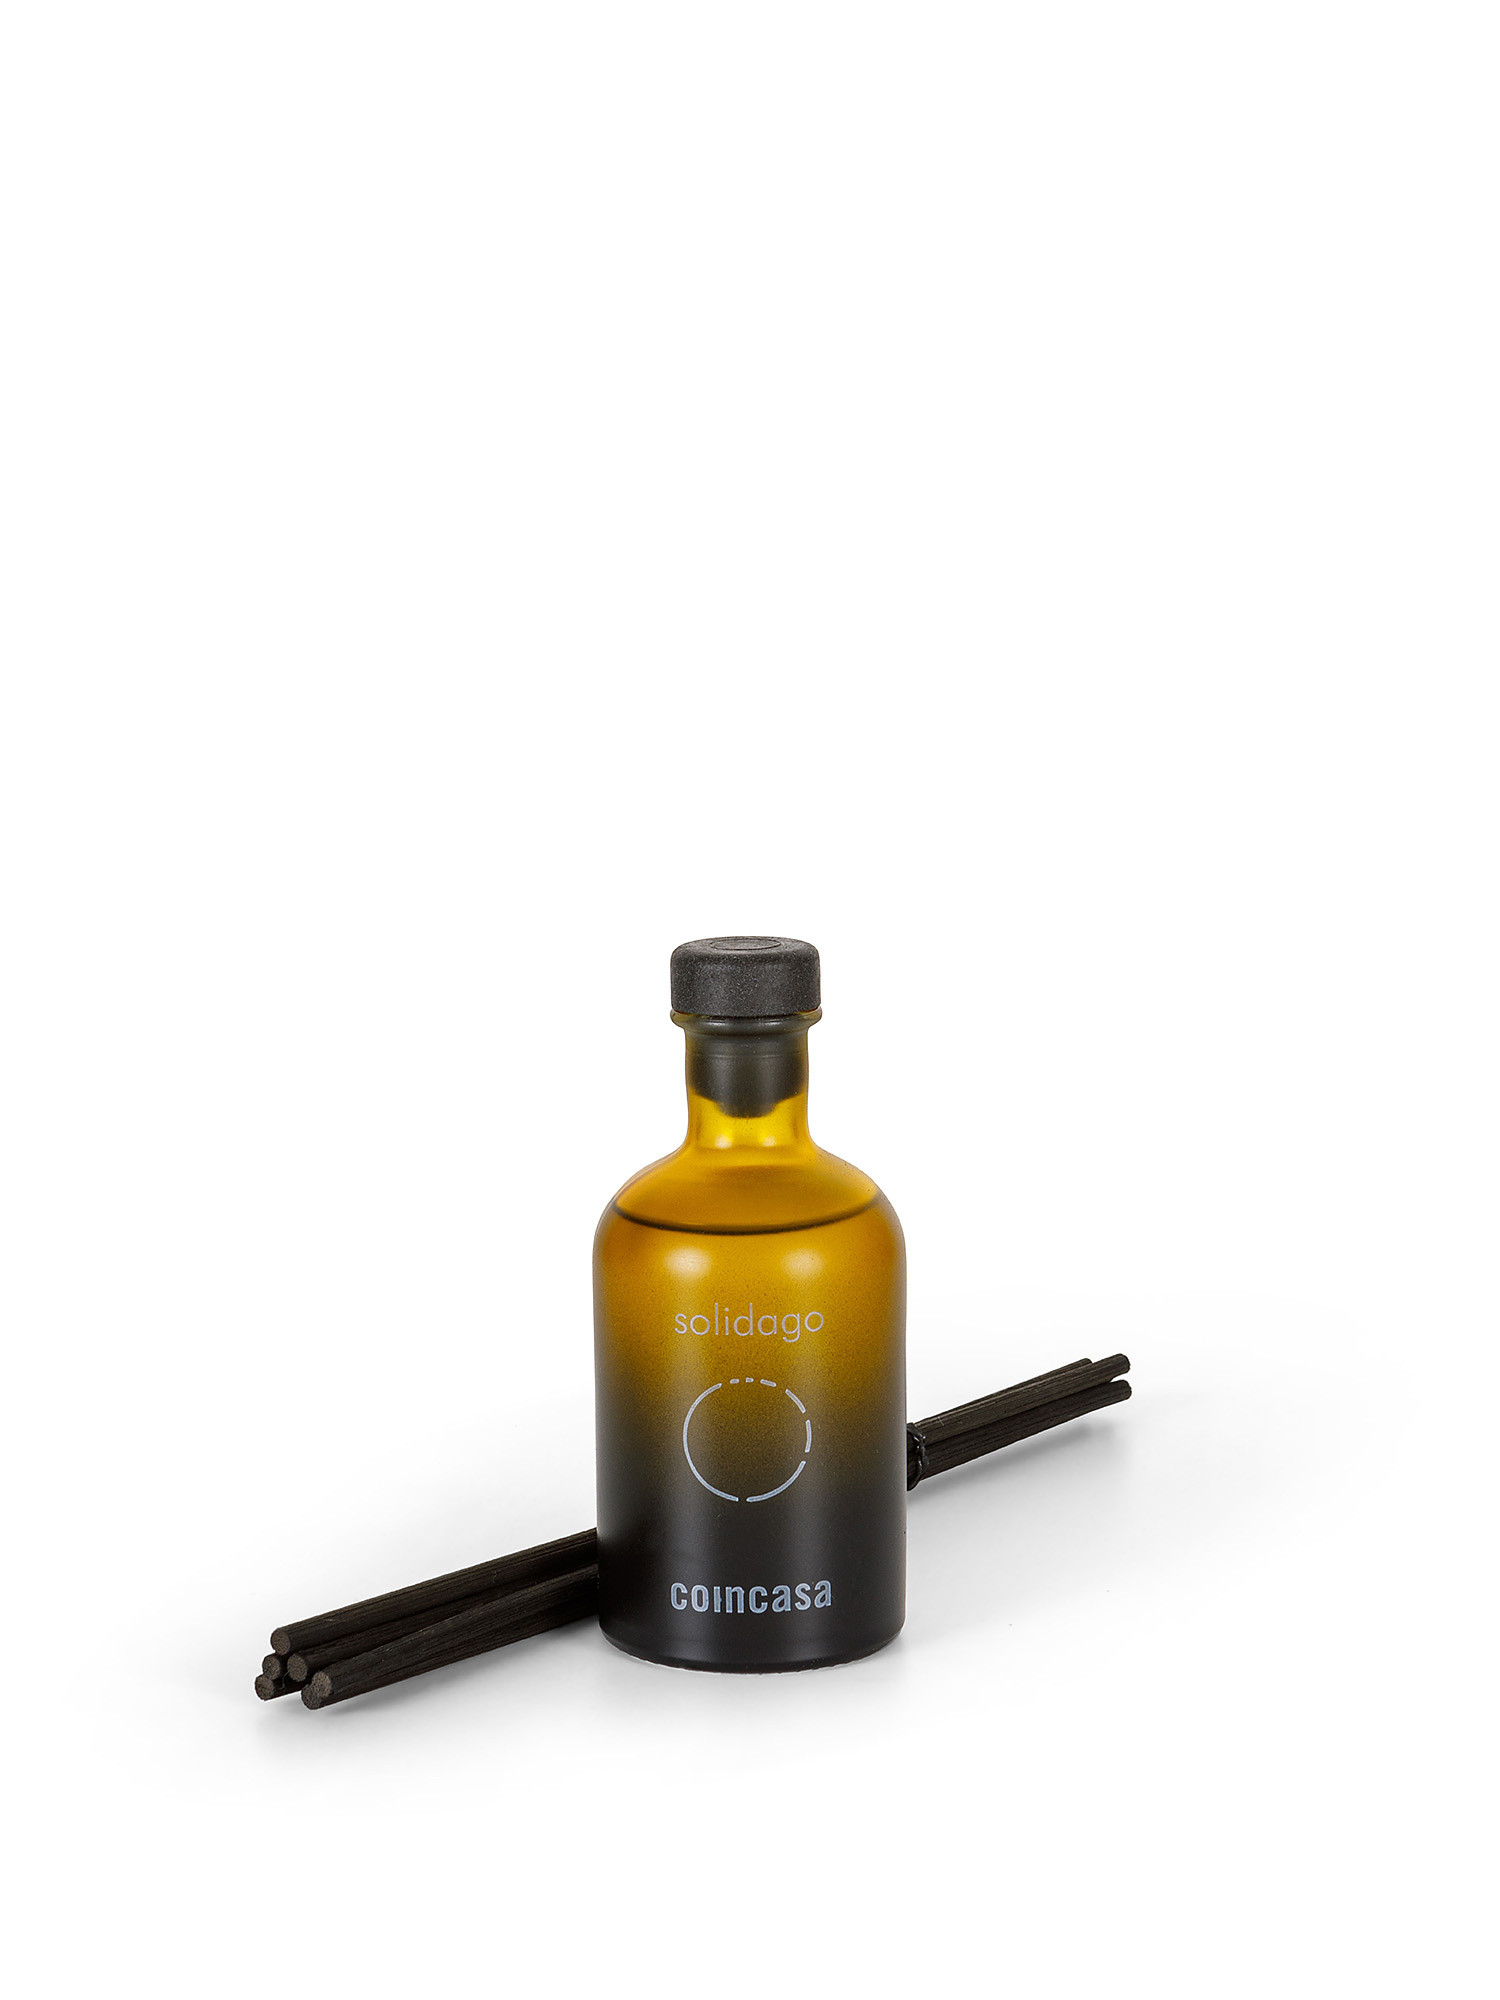 Solidago Diffuser - Sandalwood and Patchouly 100ml, Black, large image number 0